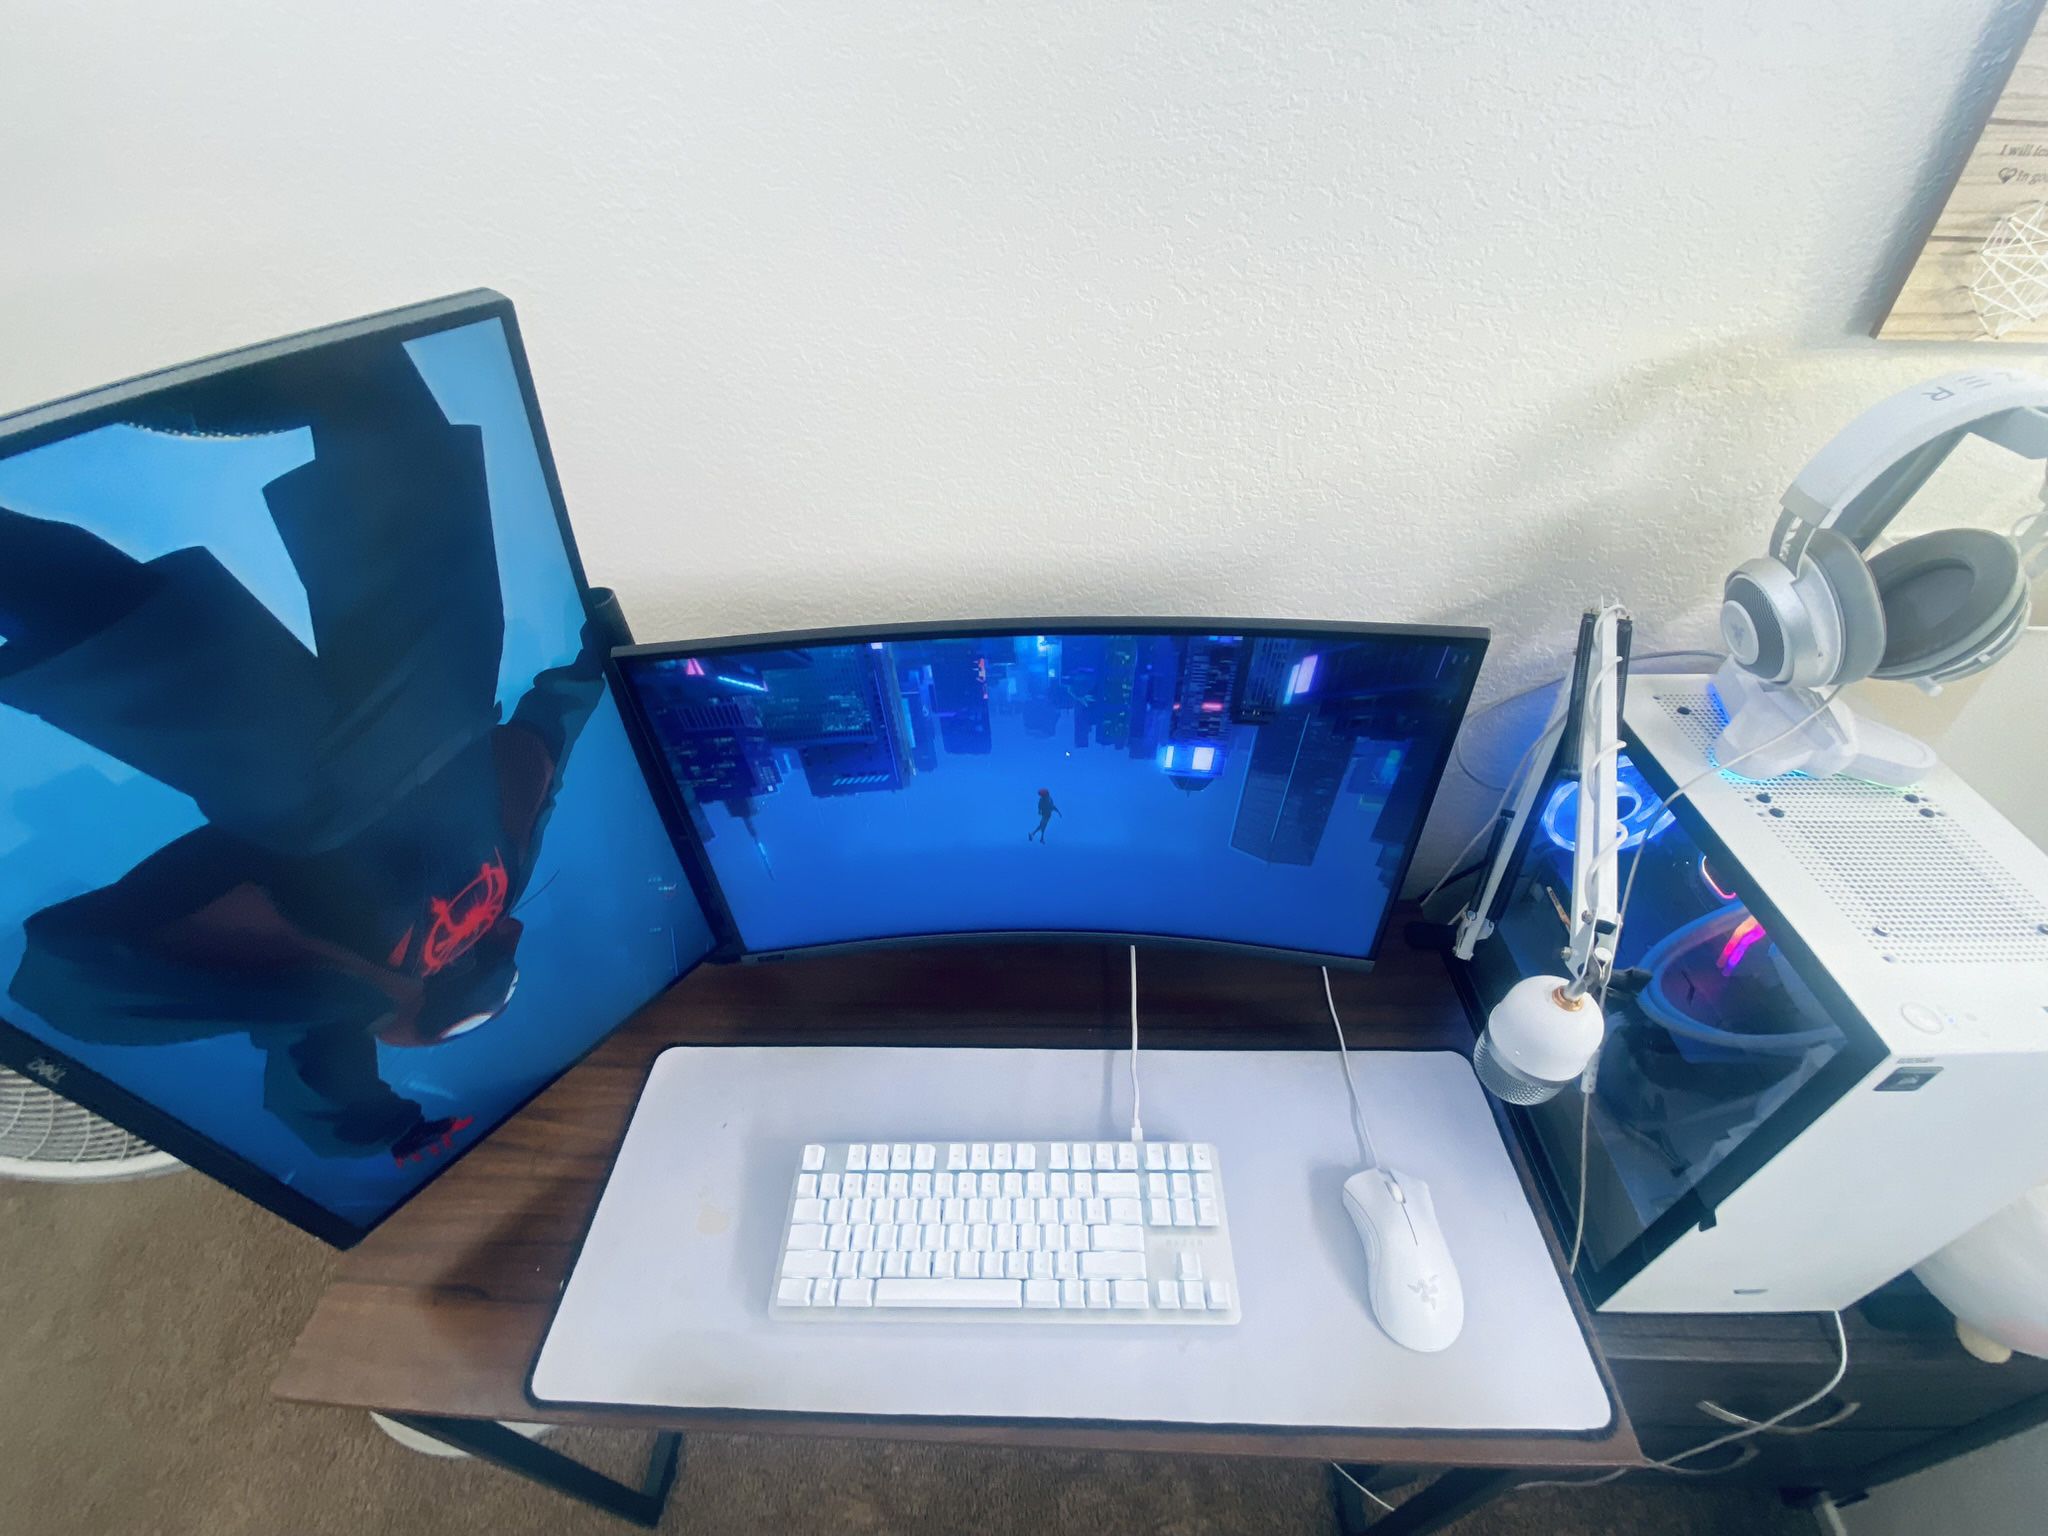 Two Monitors For $500